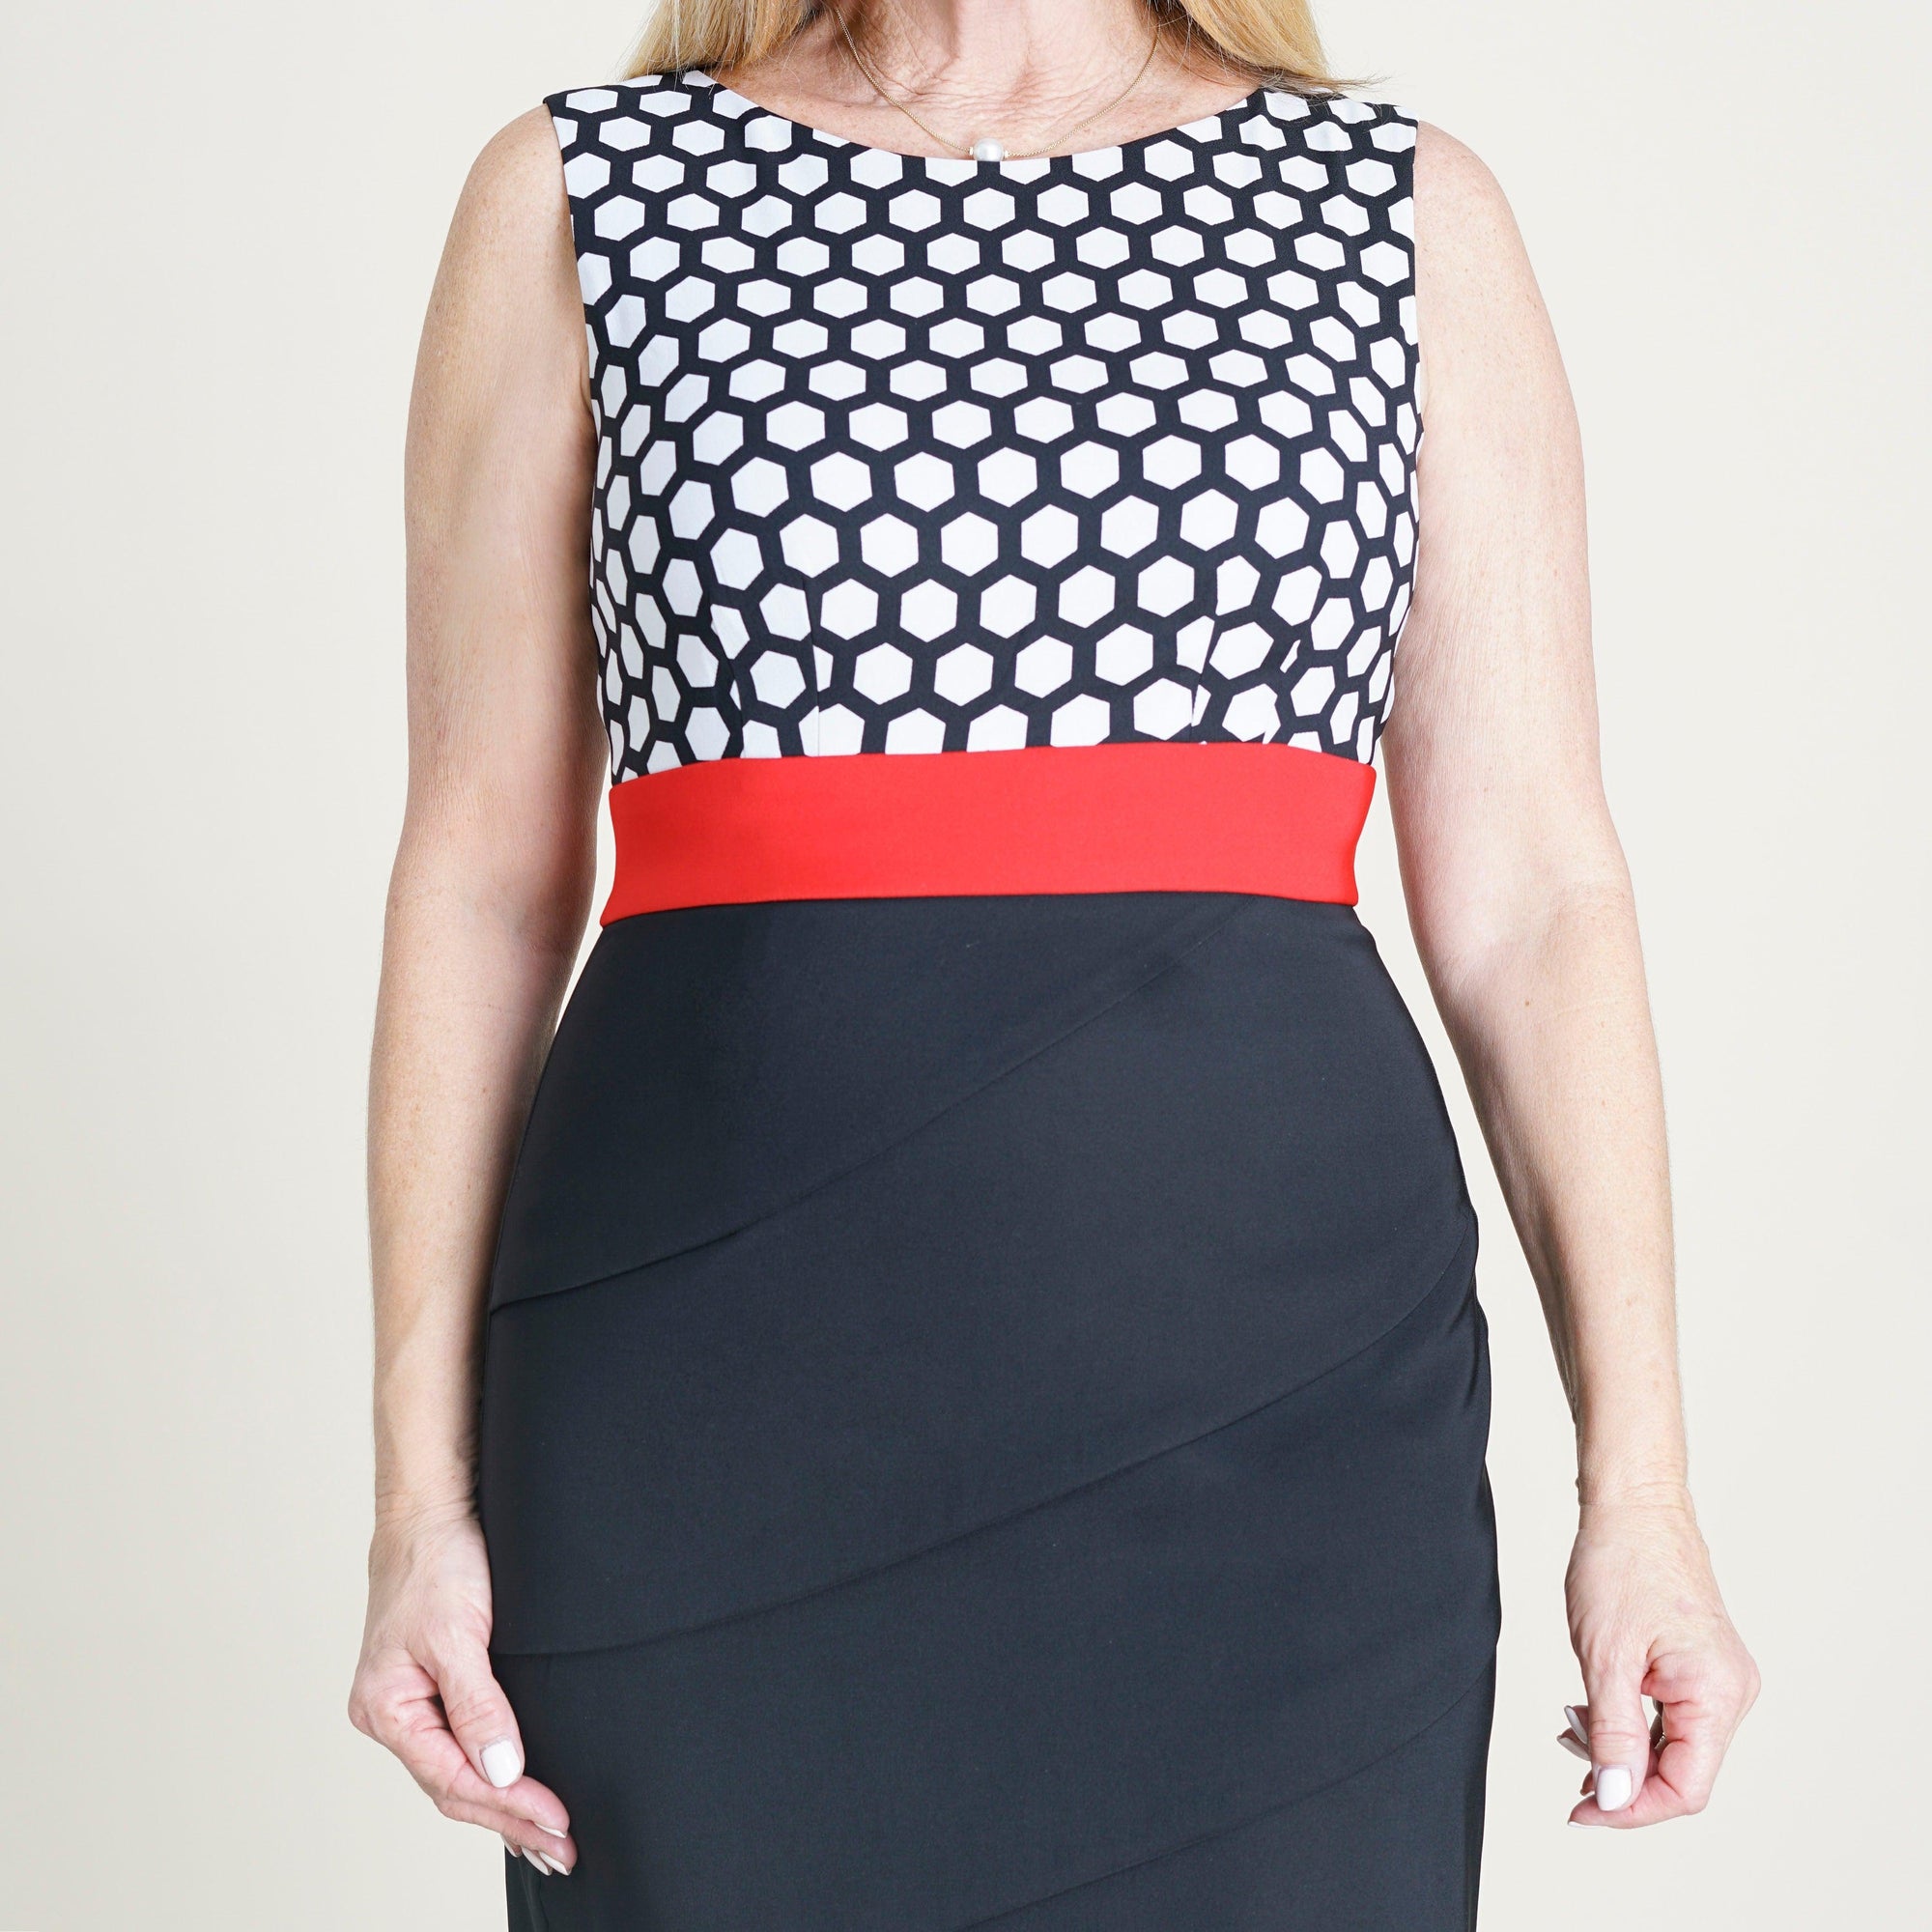 Woman posing wearing Black and red Cassie Color Block Dress from Connected Apparel